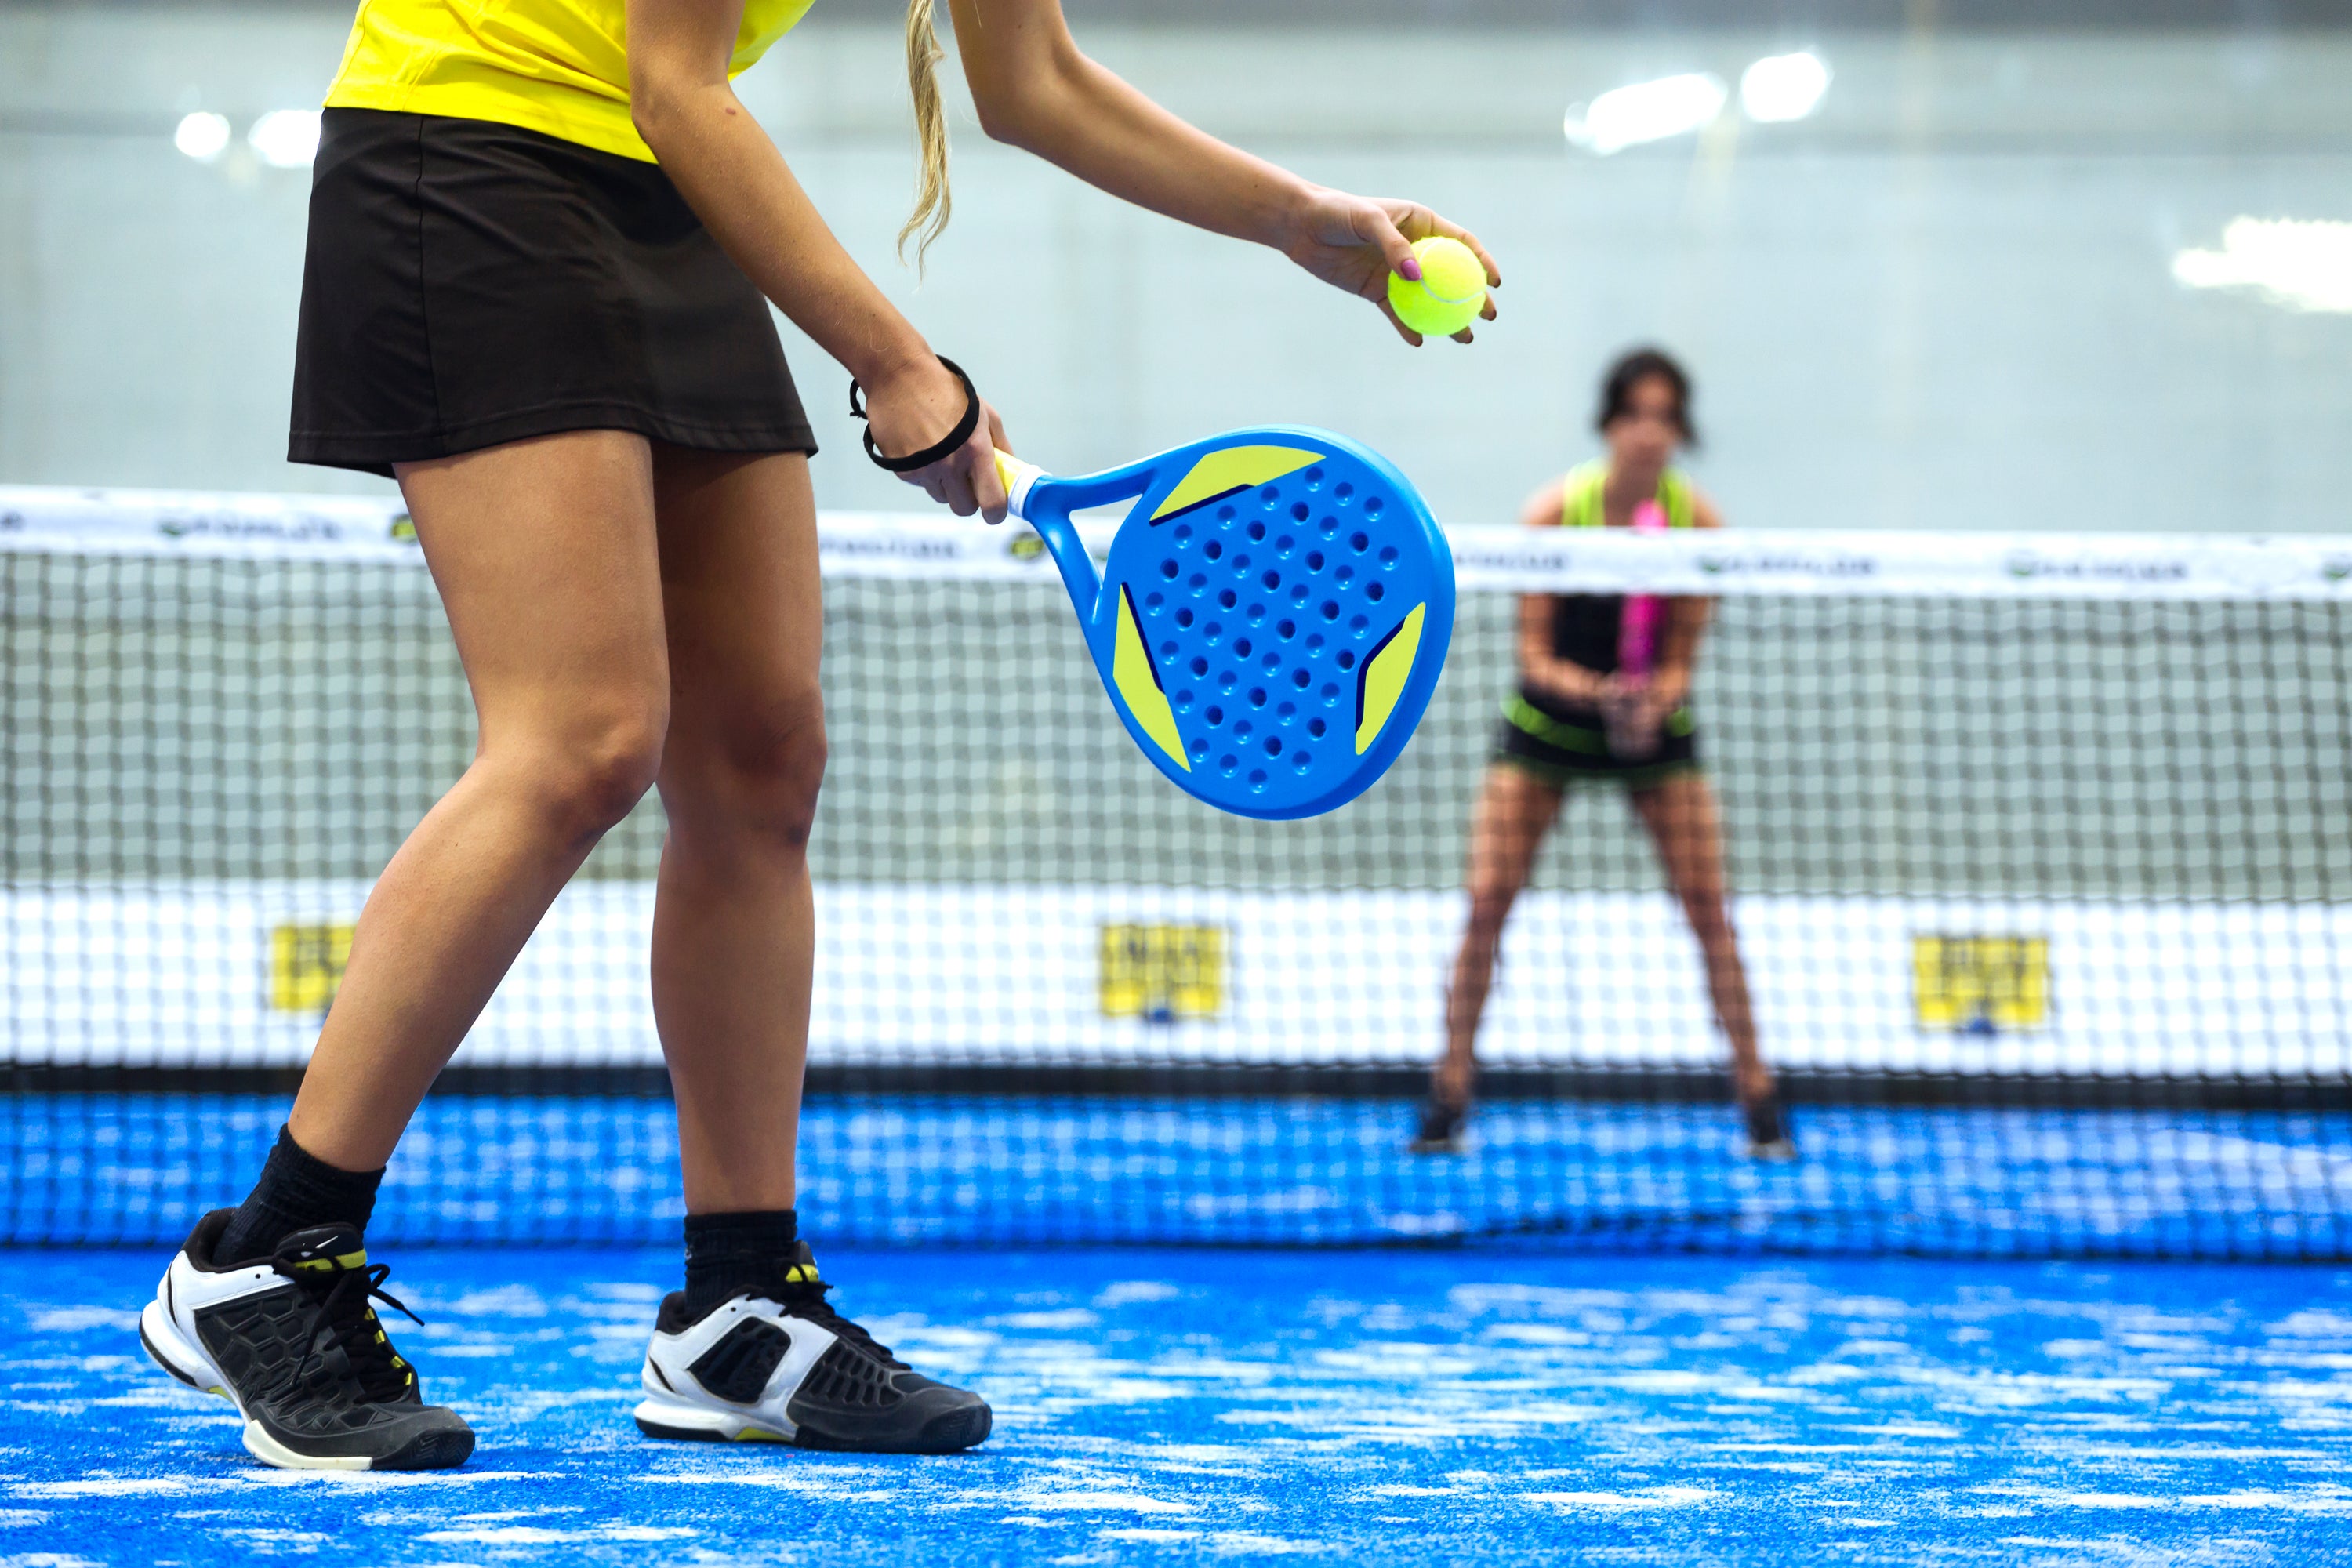 Padel - What are the rules of the game? ·